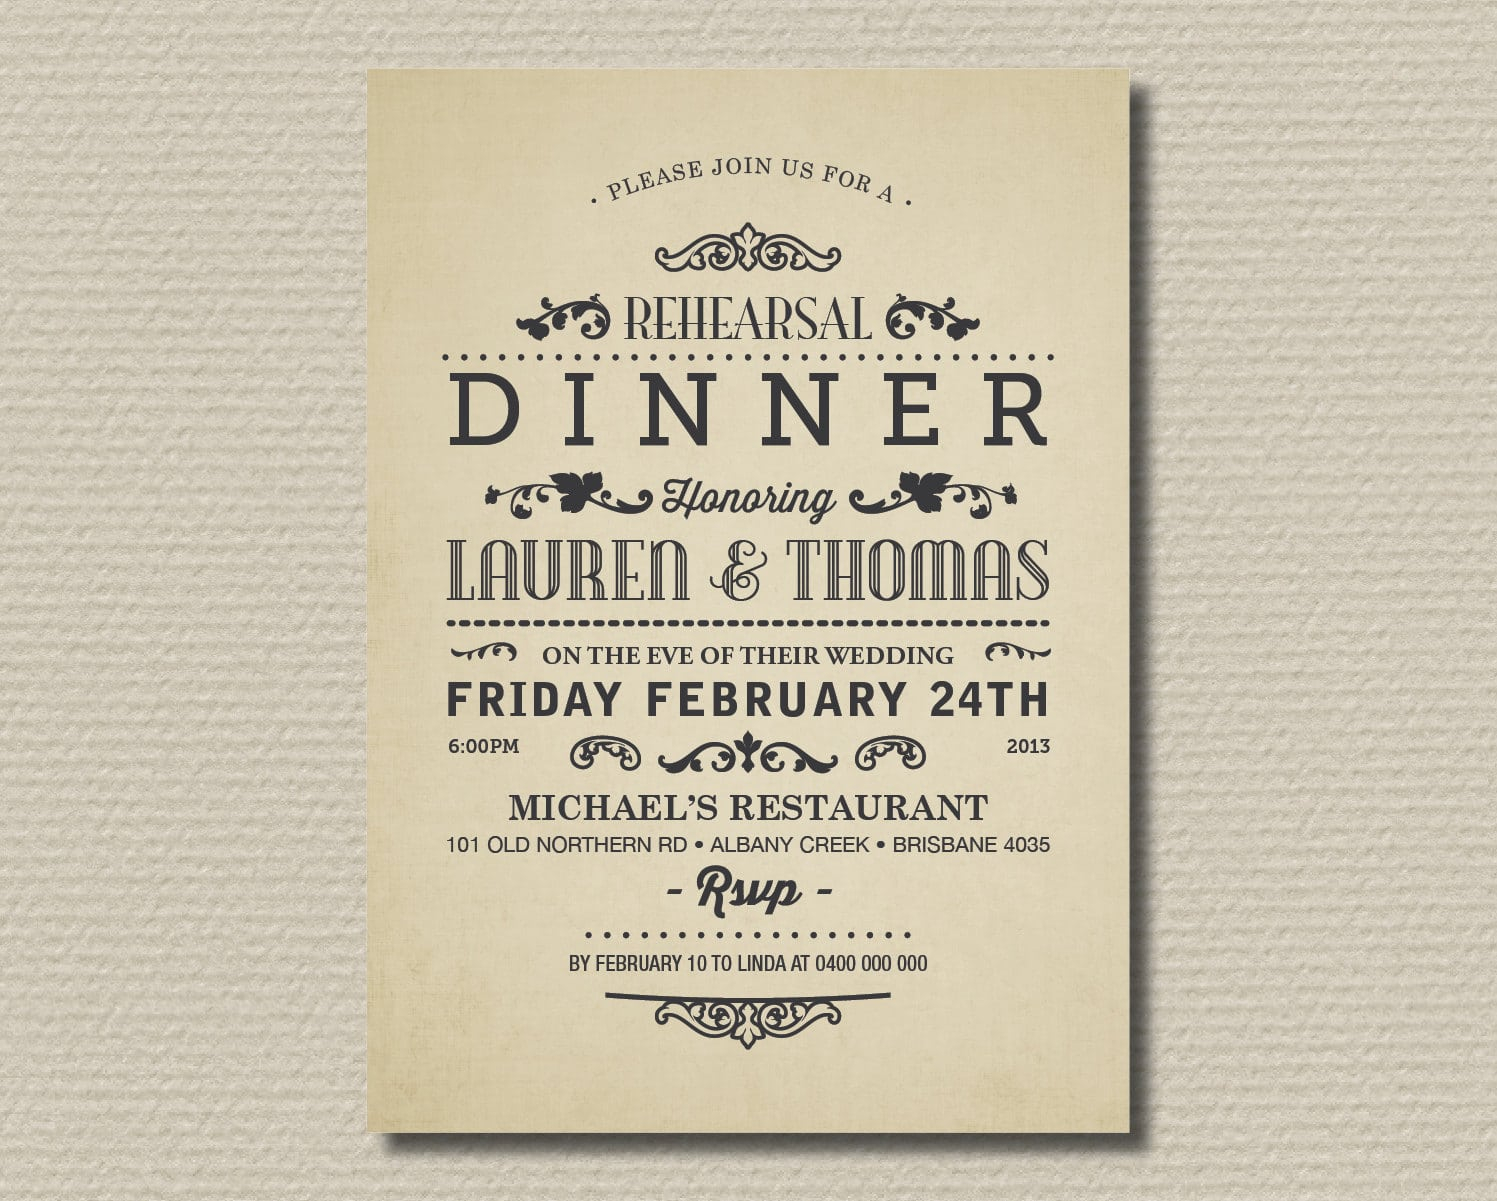 Progressive Dinner Party Invitations Examples intended for dimensions 1497 X 1201